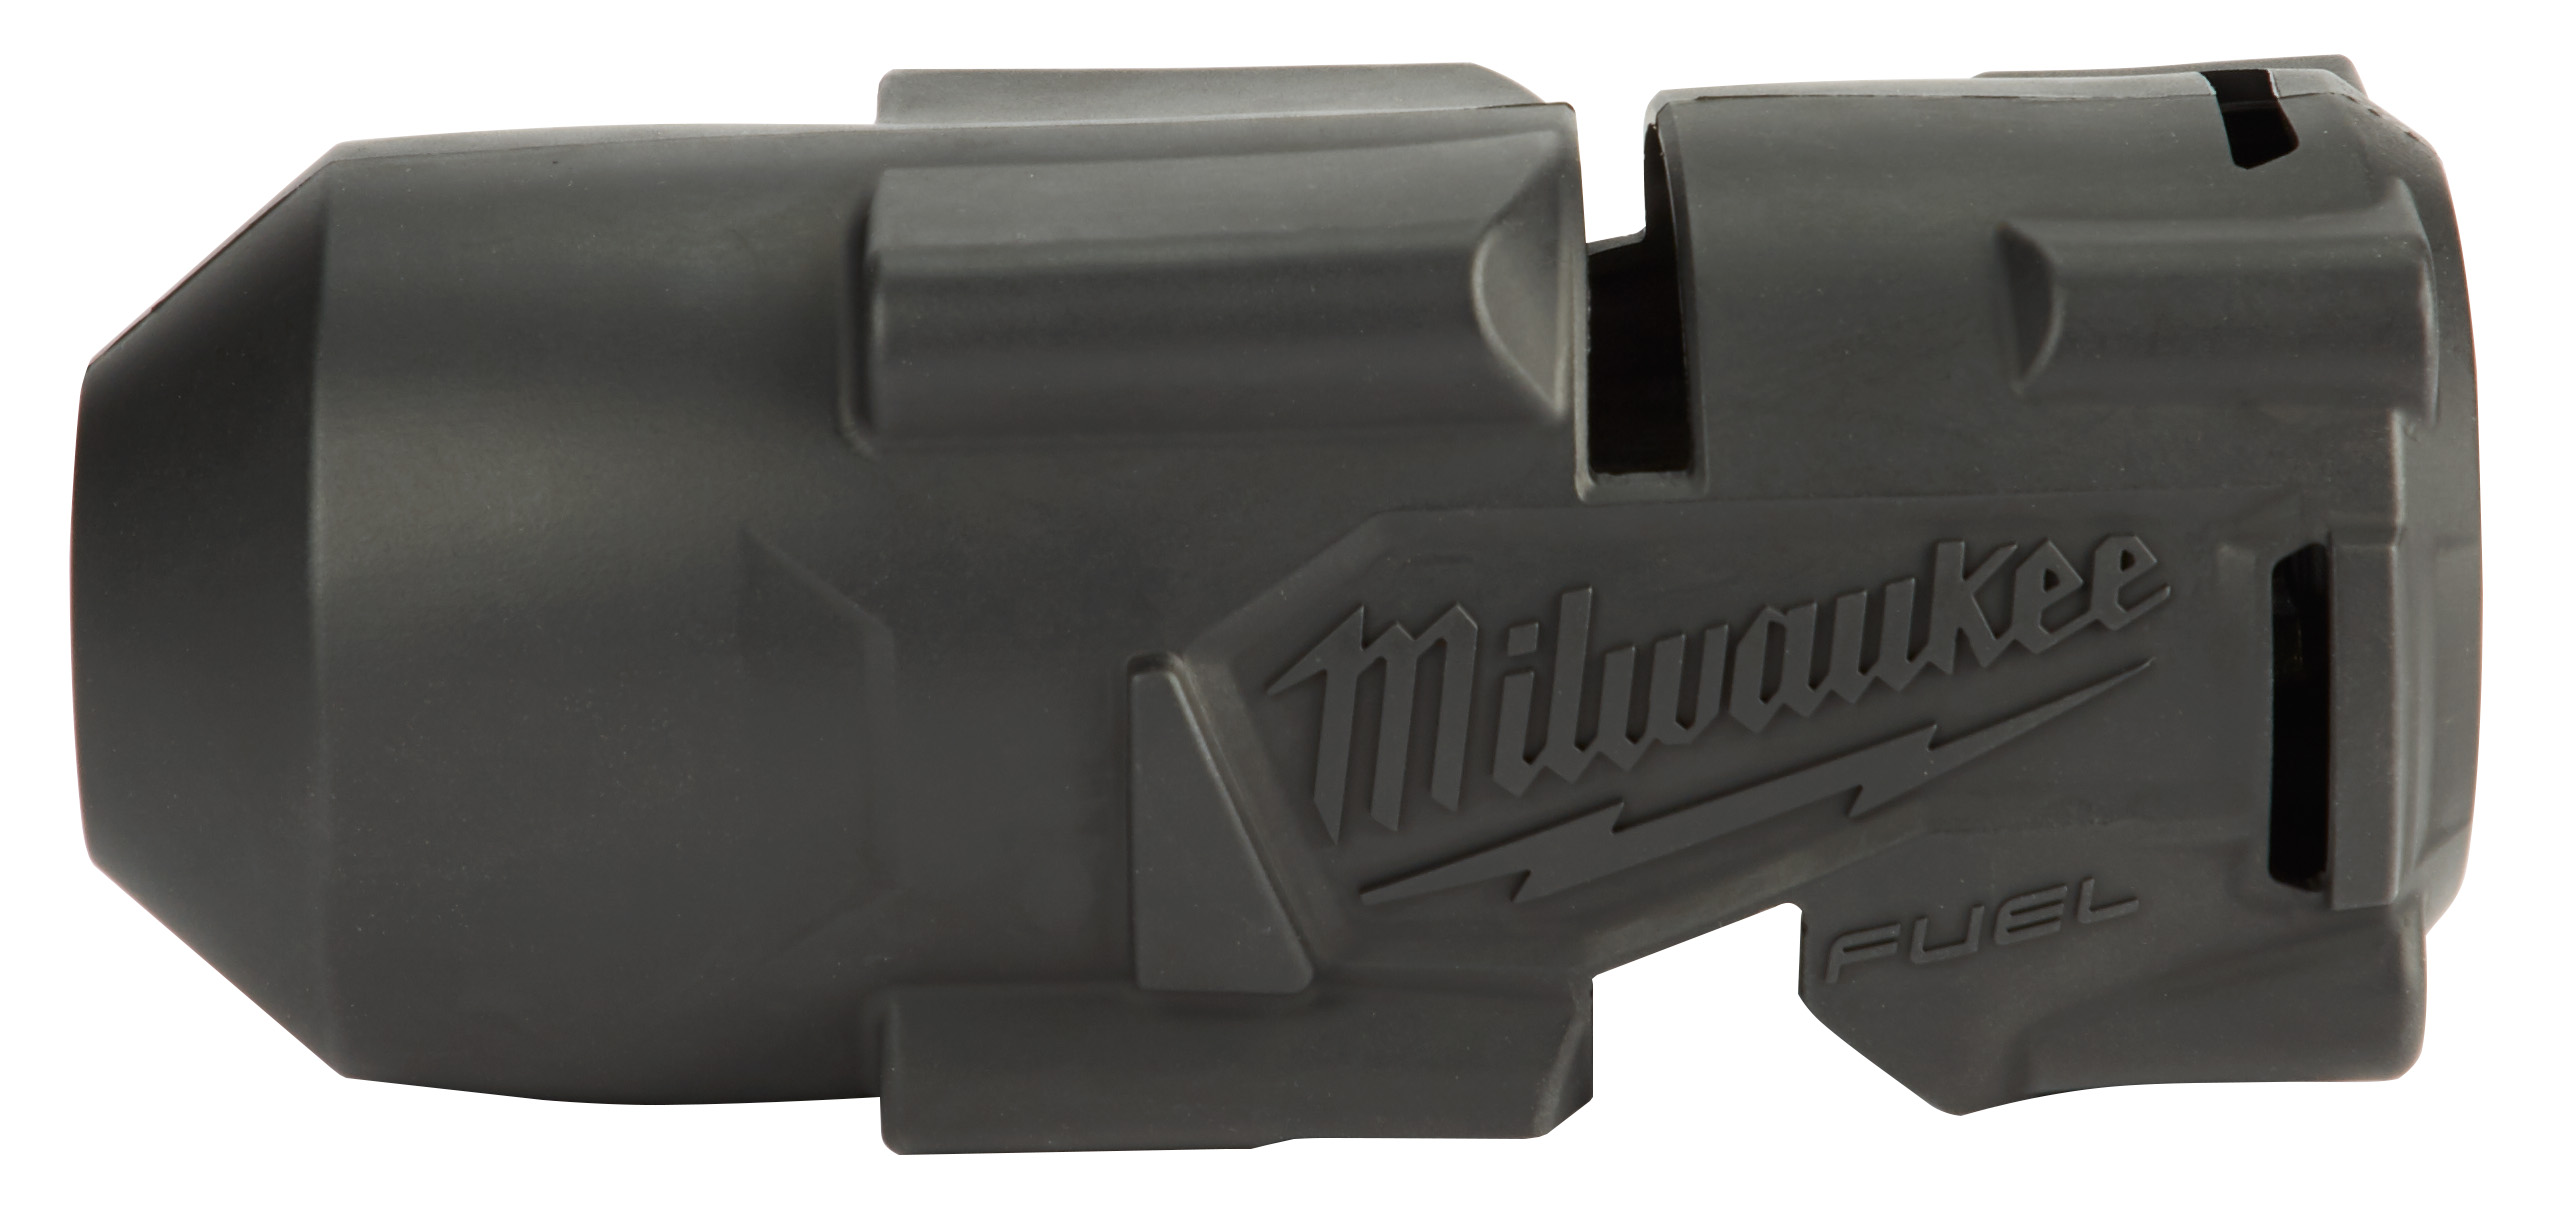 The Milwaukee 49-16-2767 tool boot is for use with the M18 FUEL™ high torque impact wrench (2767-20 & 2863-20) only. This product provides a lightweight, durable solution that is meant to protect the tool and work surface. A durable rubber design will withstand corrosive materials commonly found in maintenance environments. Not for use on or near live electrical circuits. Use on any other product may result in damage to tool motor and may void tool warranty.